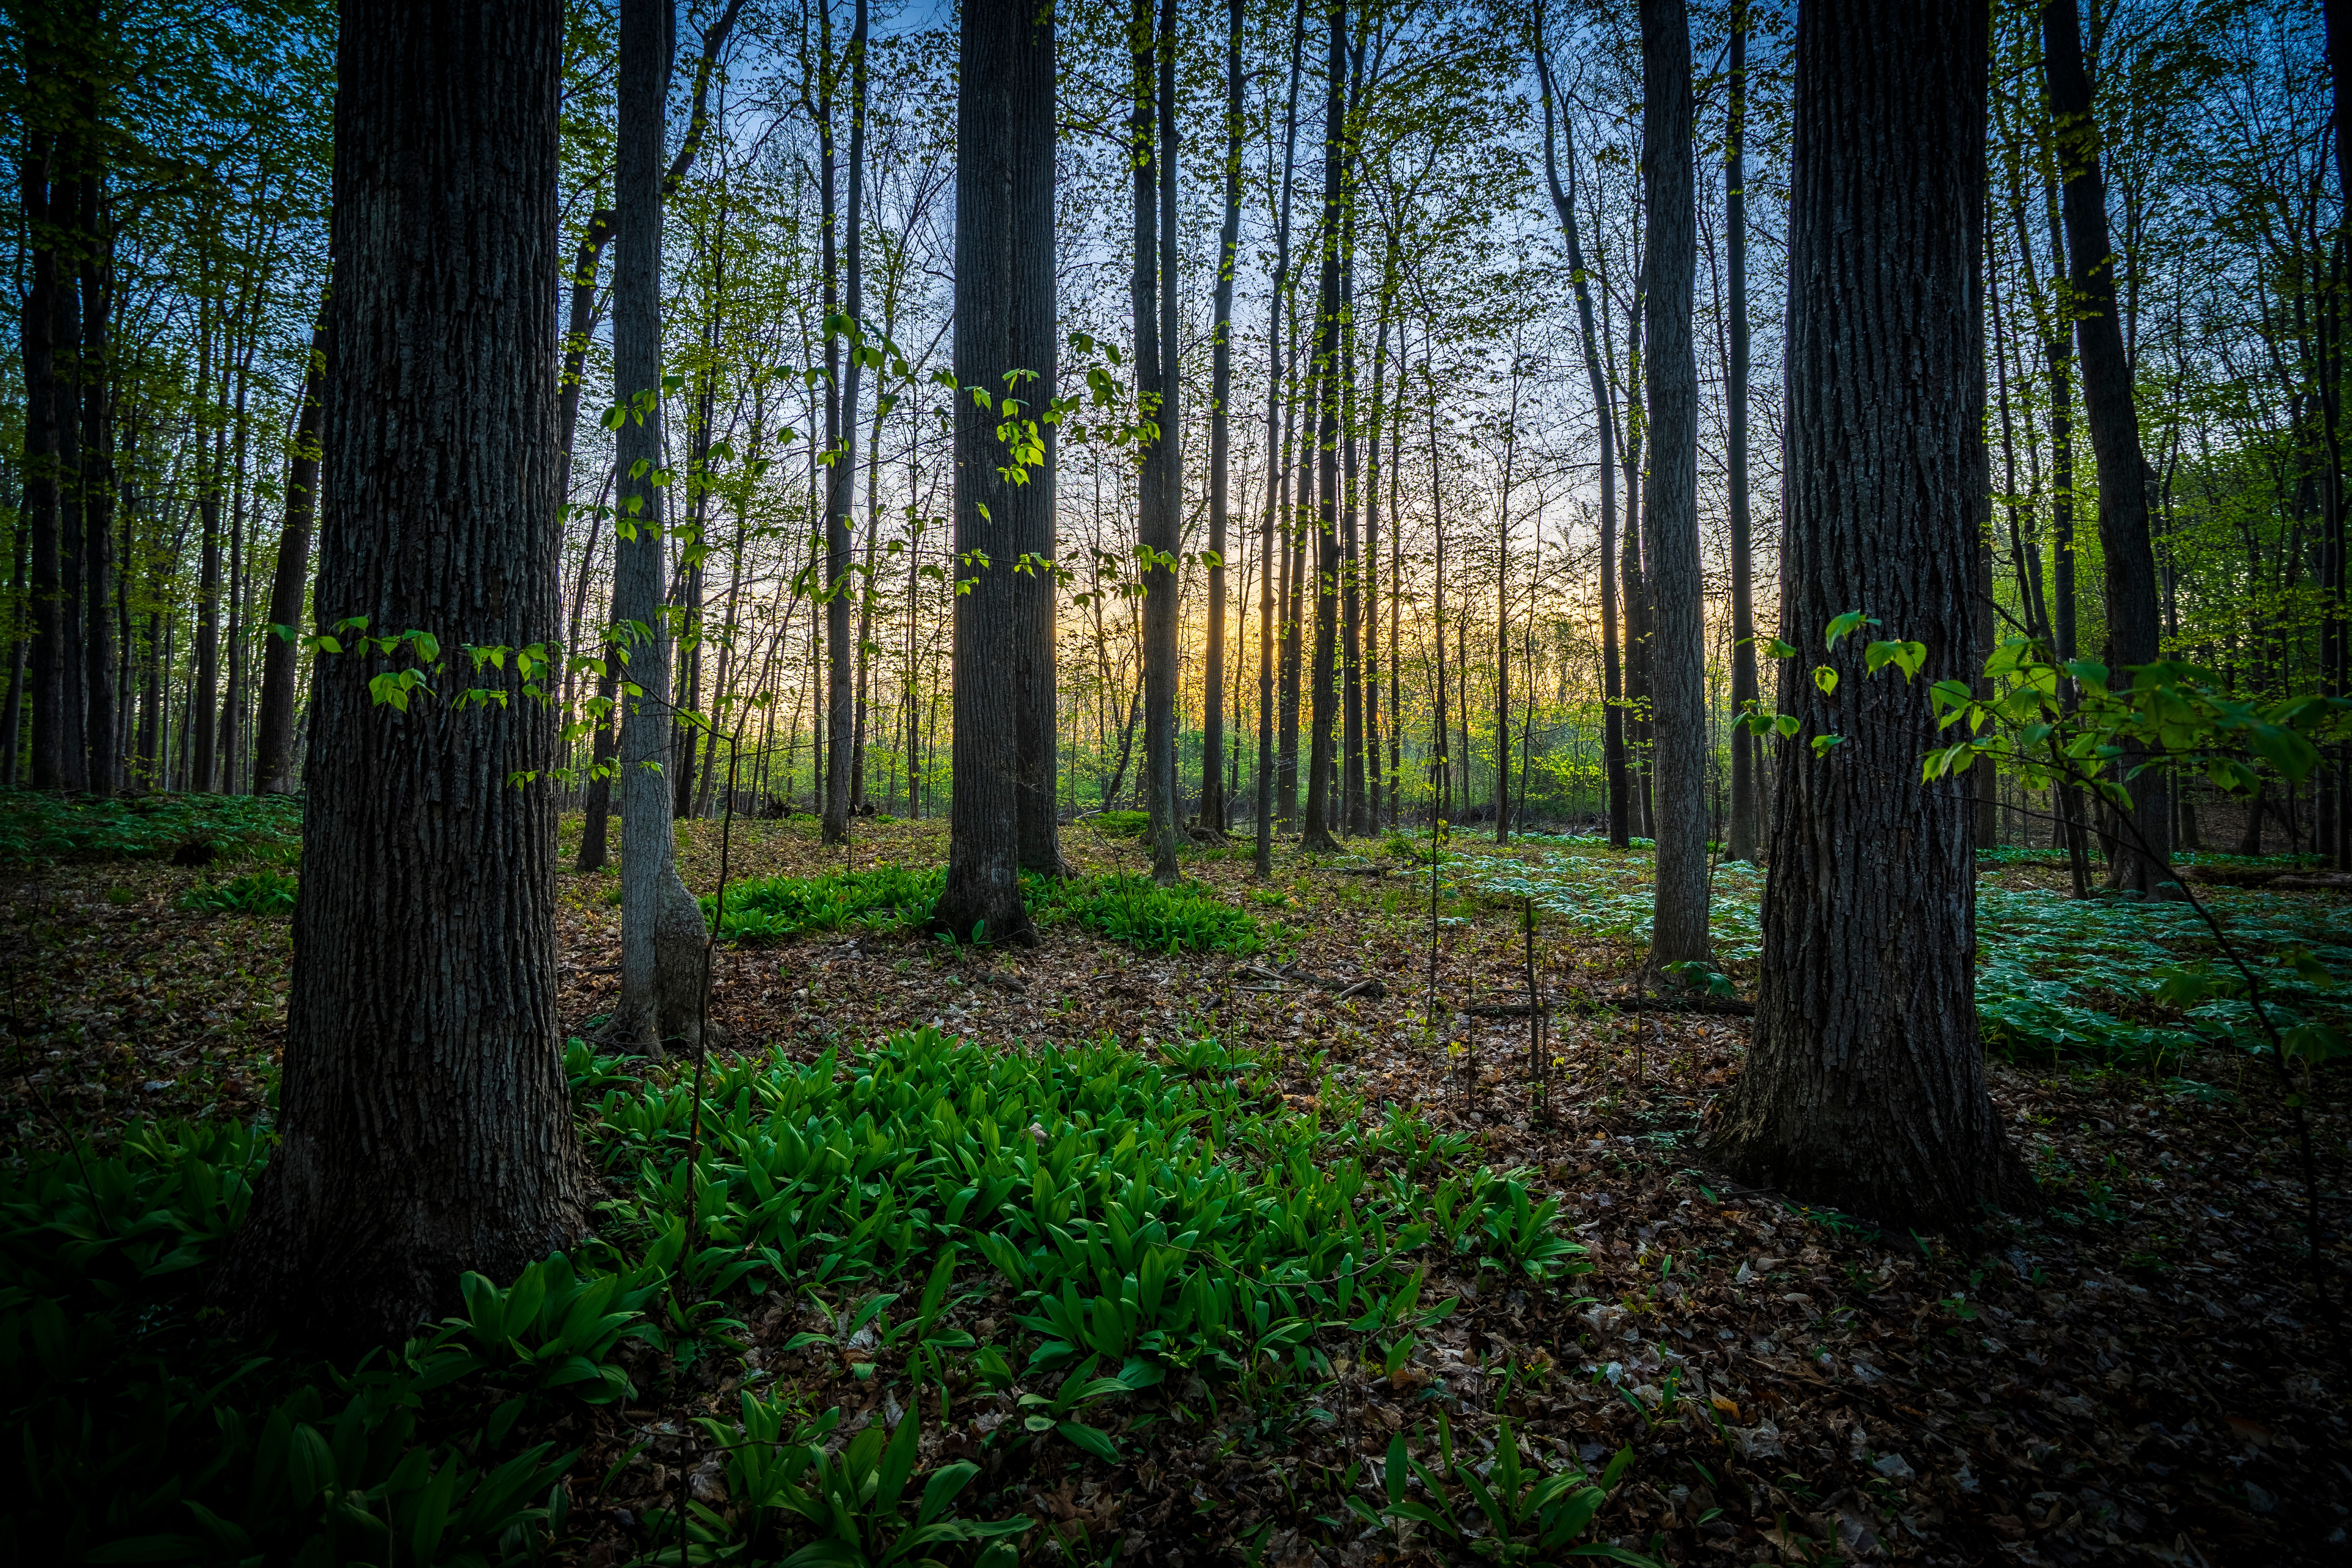 A view of the sunset through the trees in the Sacred Grove.